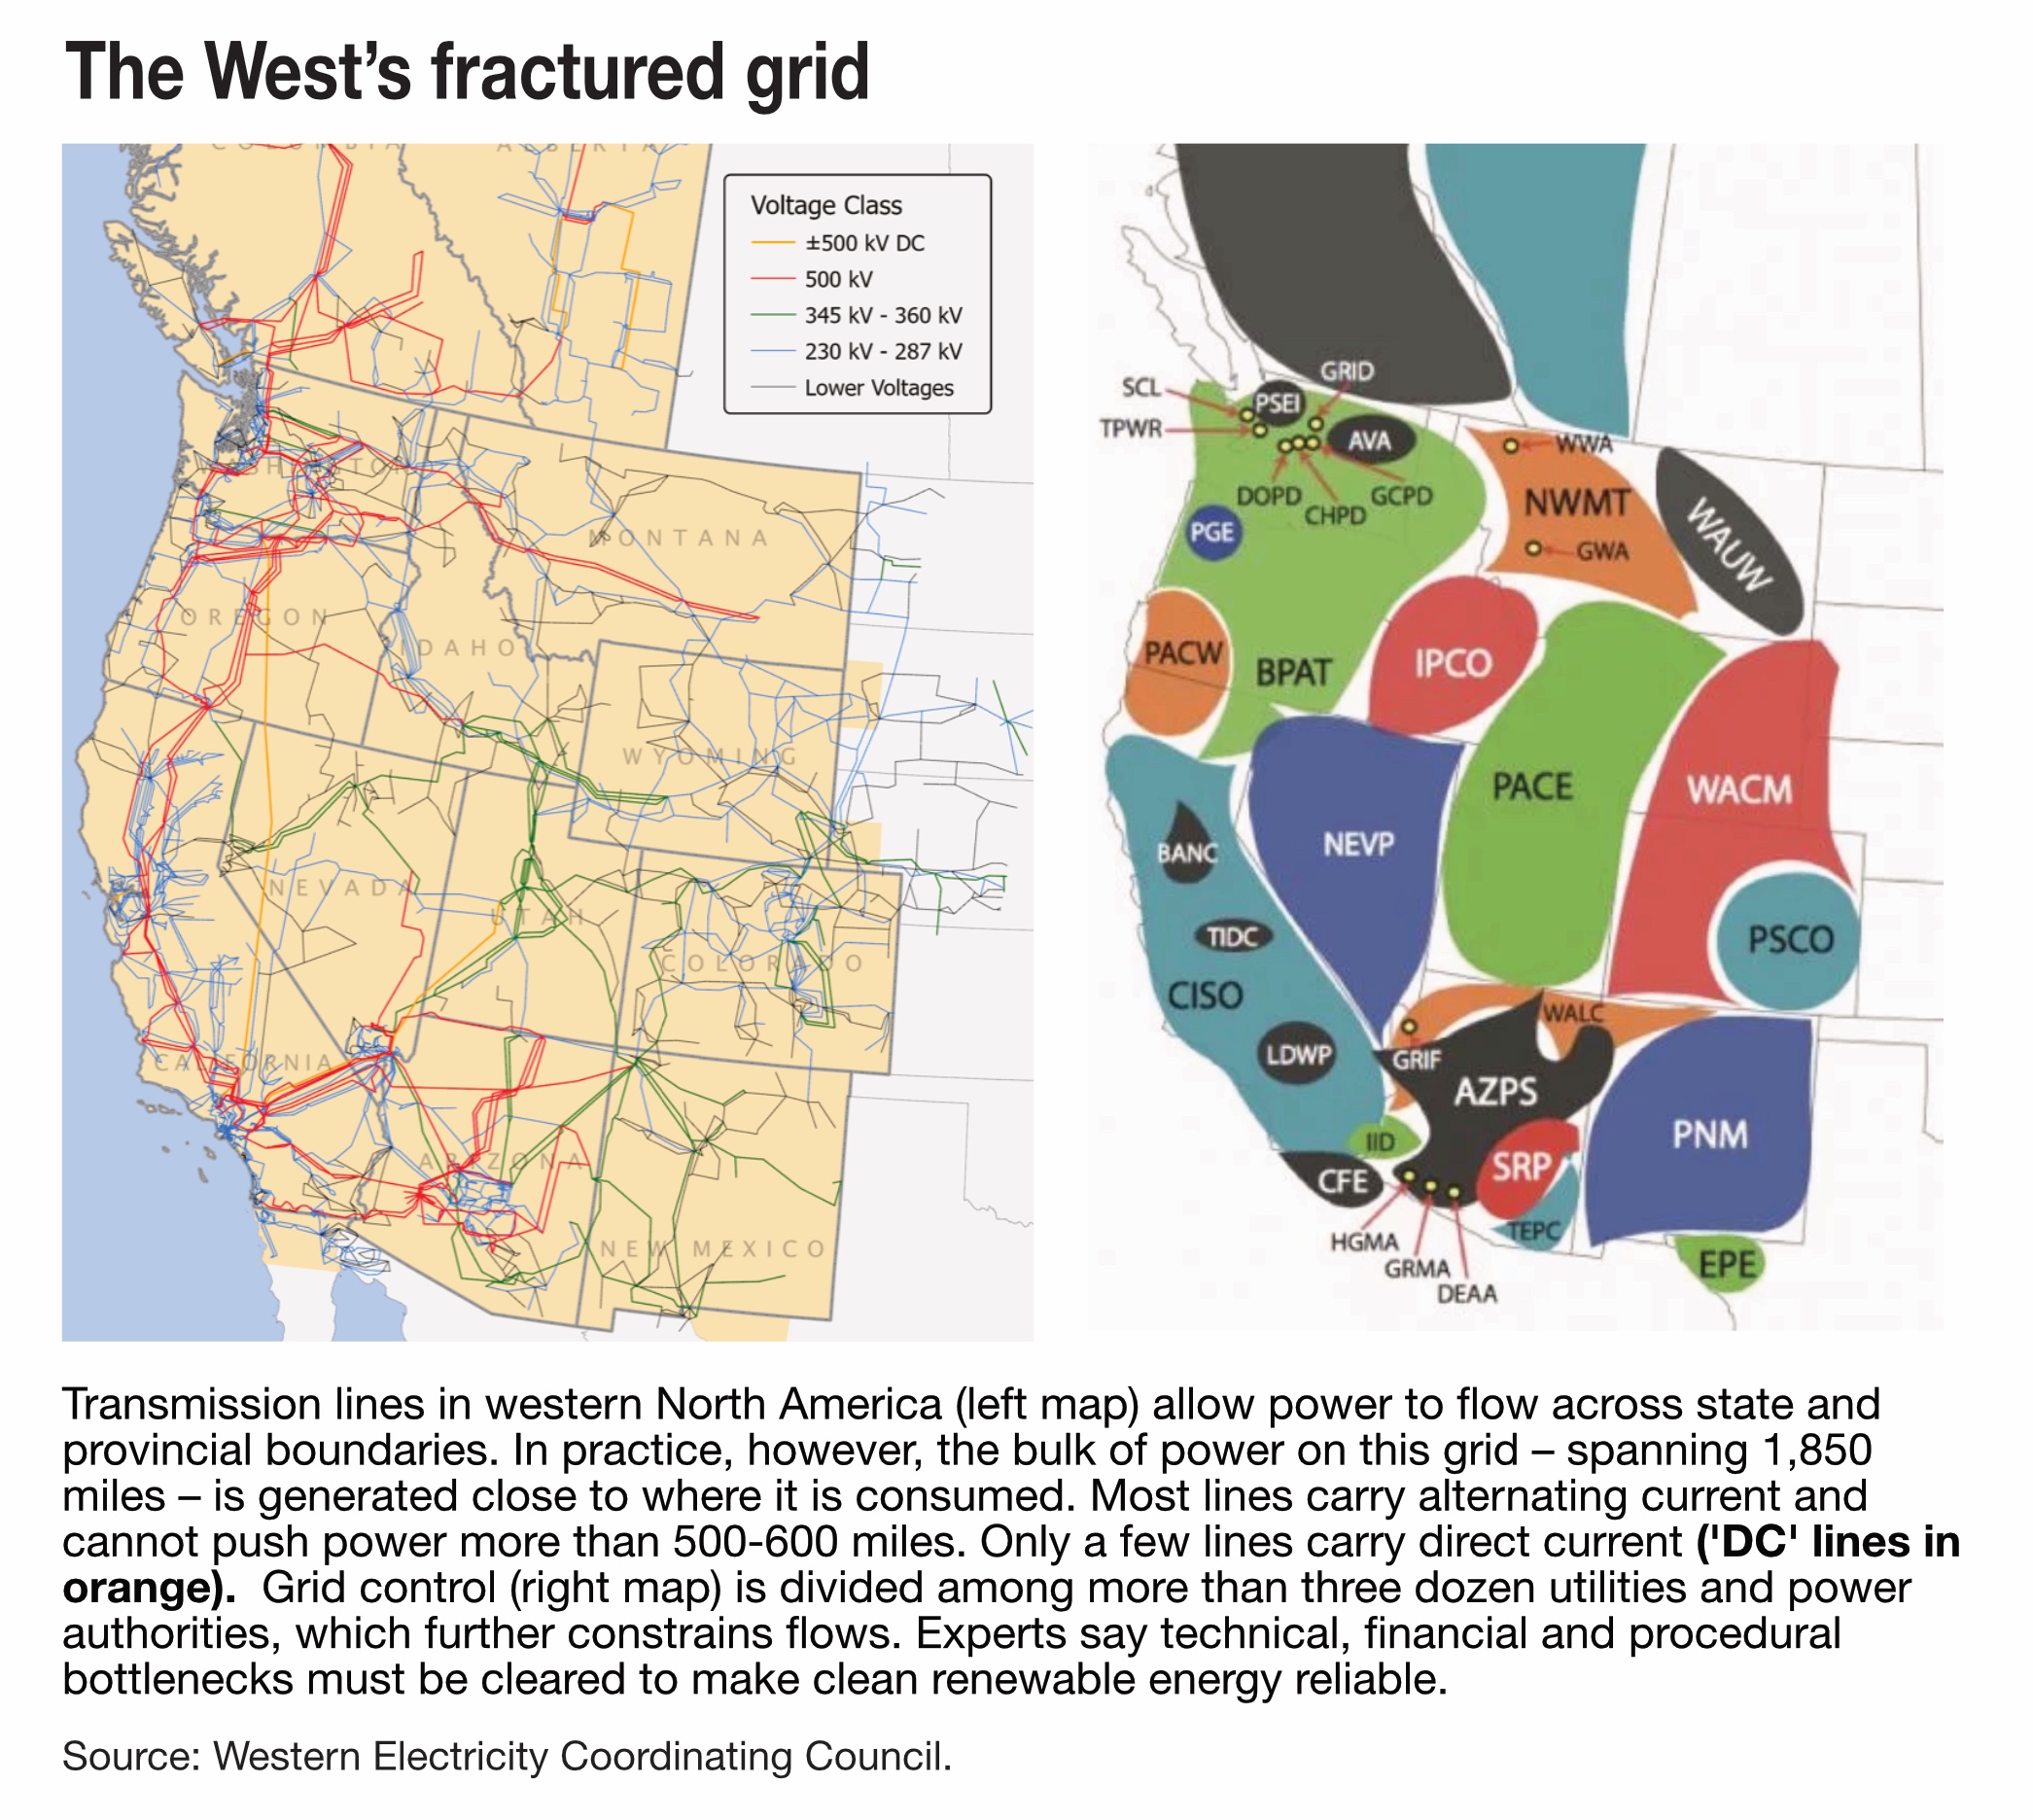 The West's fractured grid